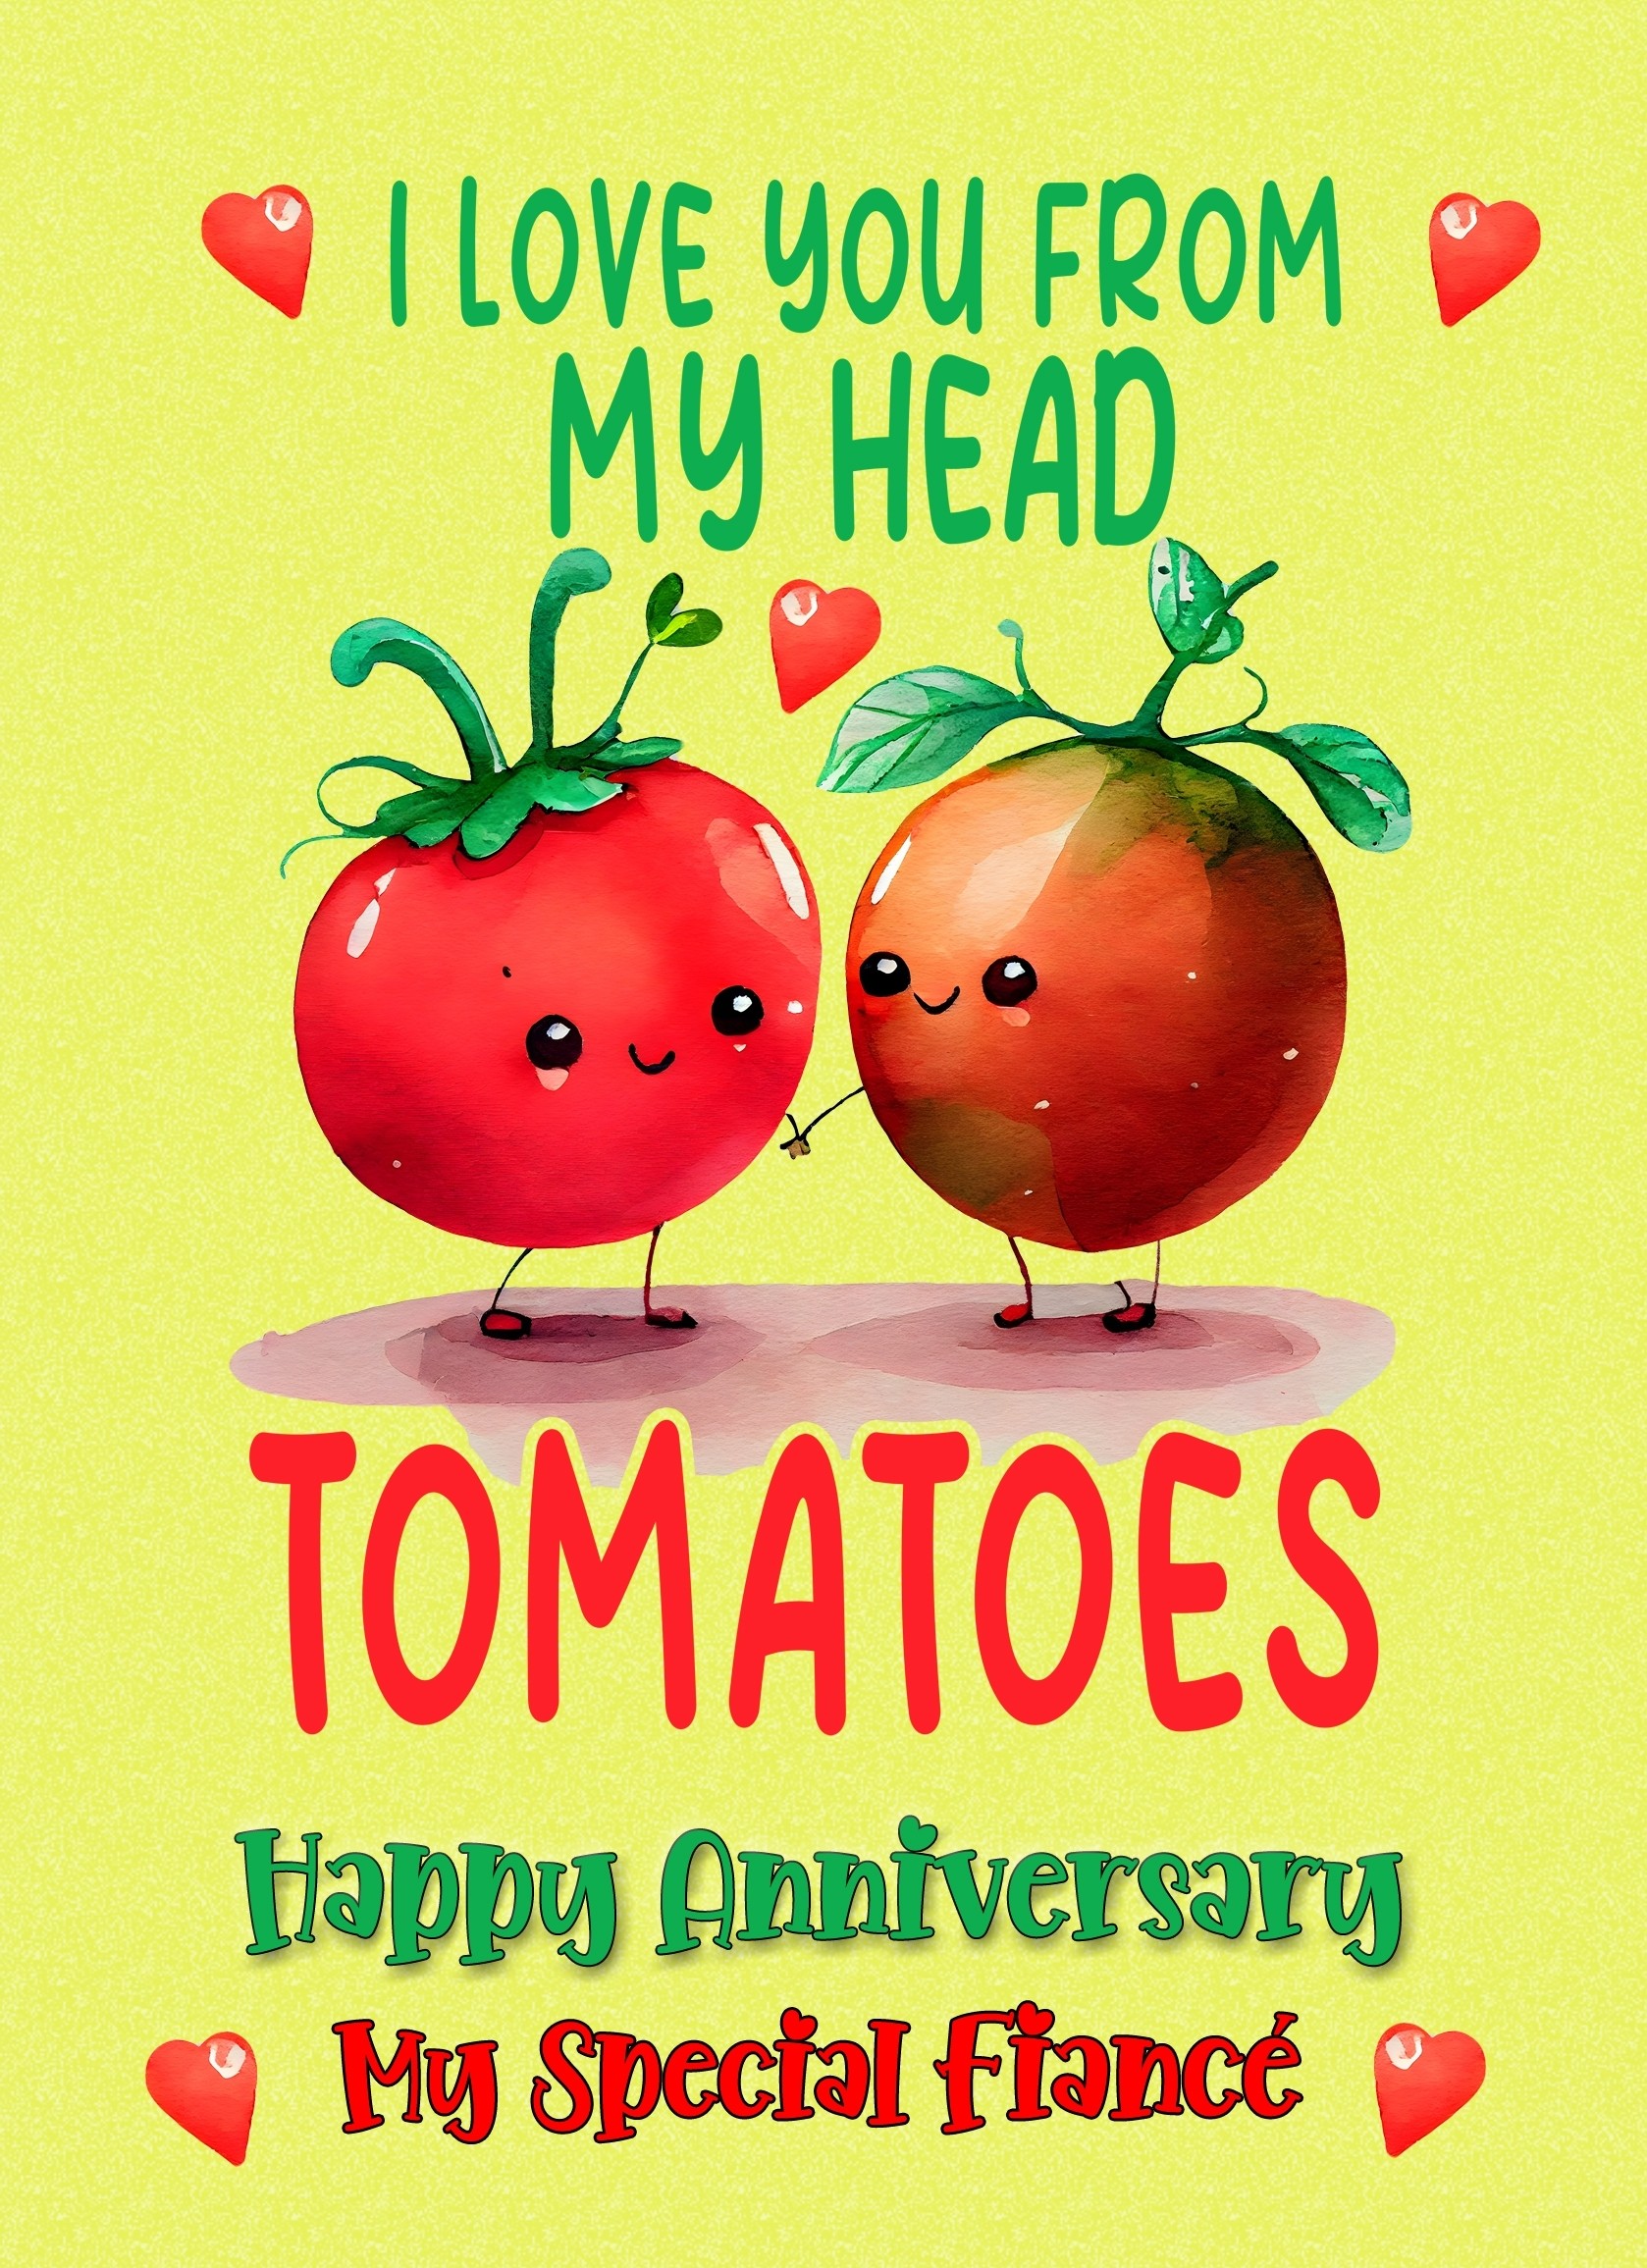 Funny Pun Romantic Anniversary Card for Fiance (Tomatoes)